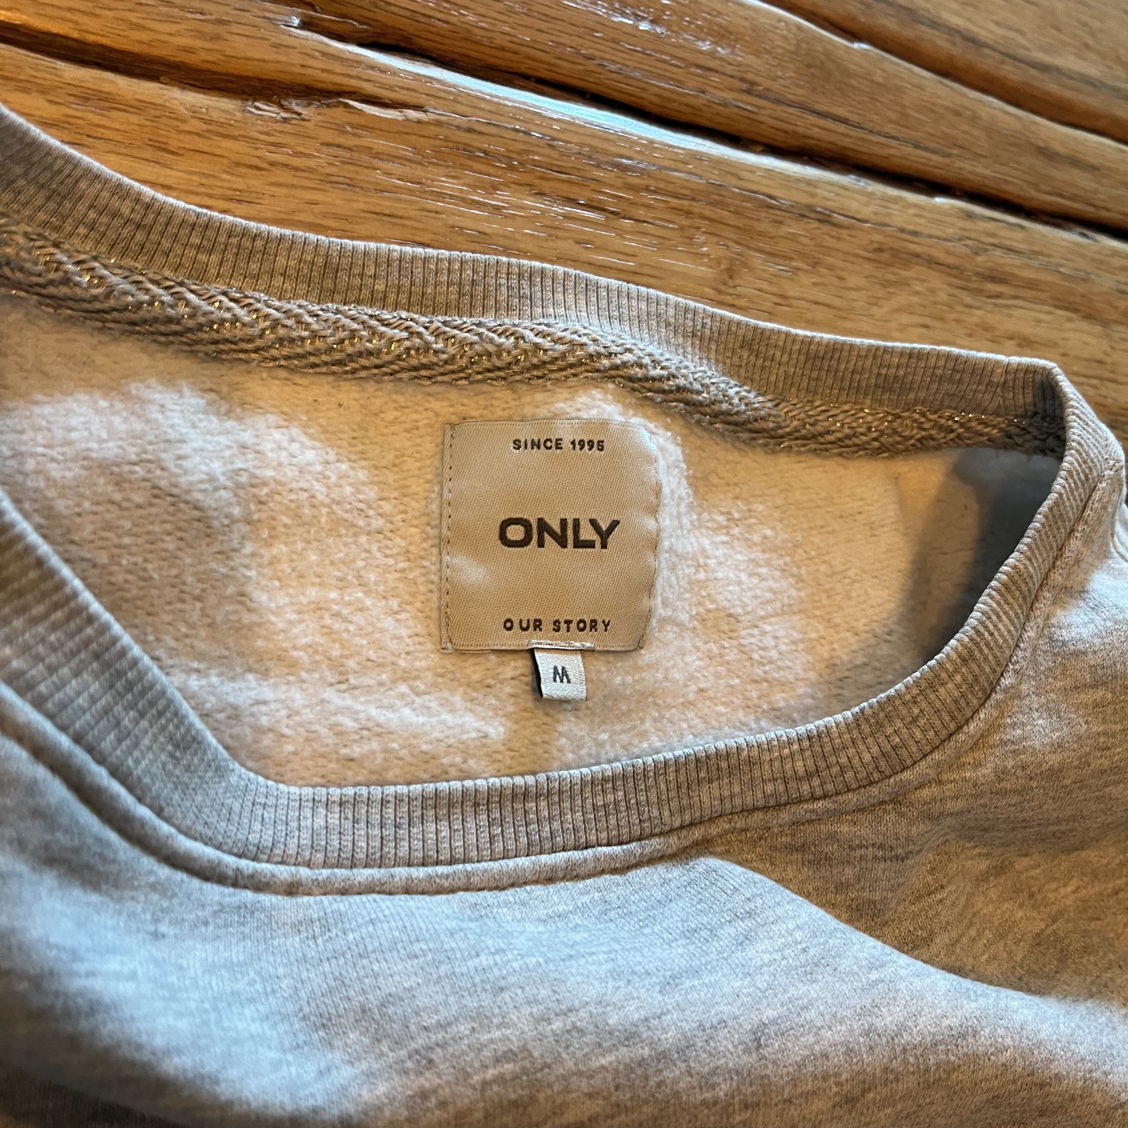 ONLY Pullover Grau - M